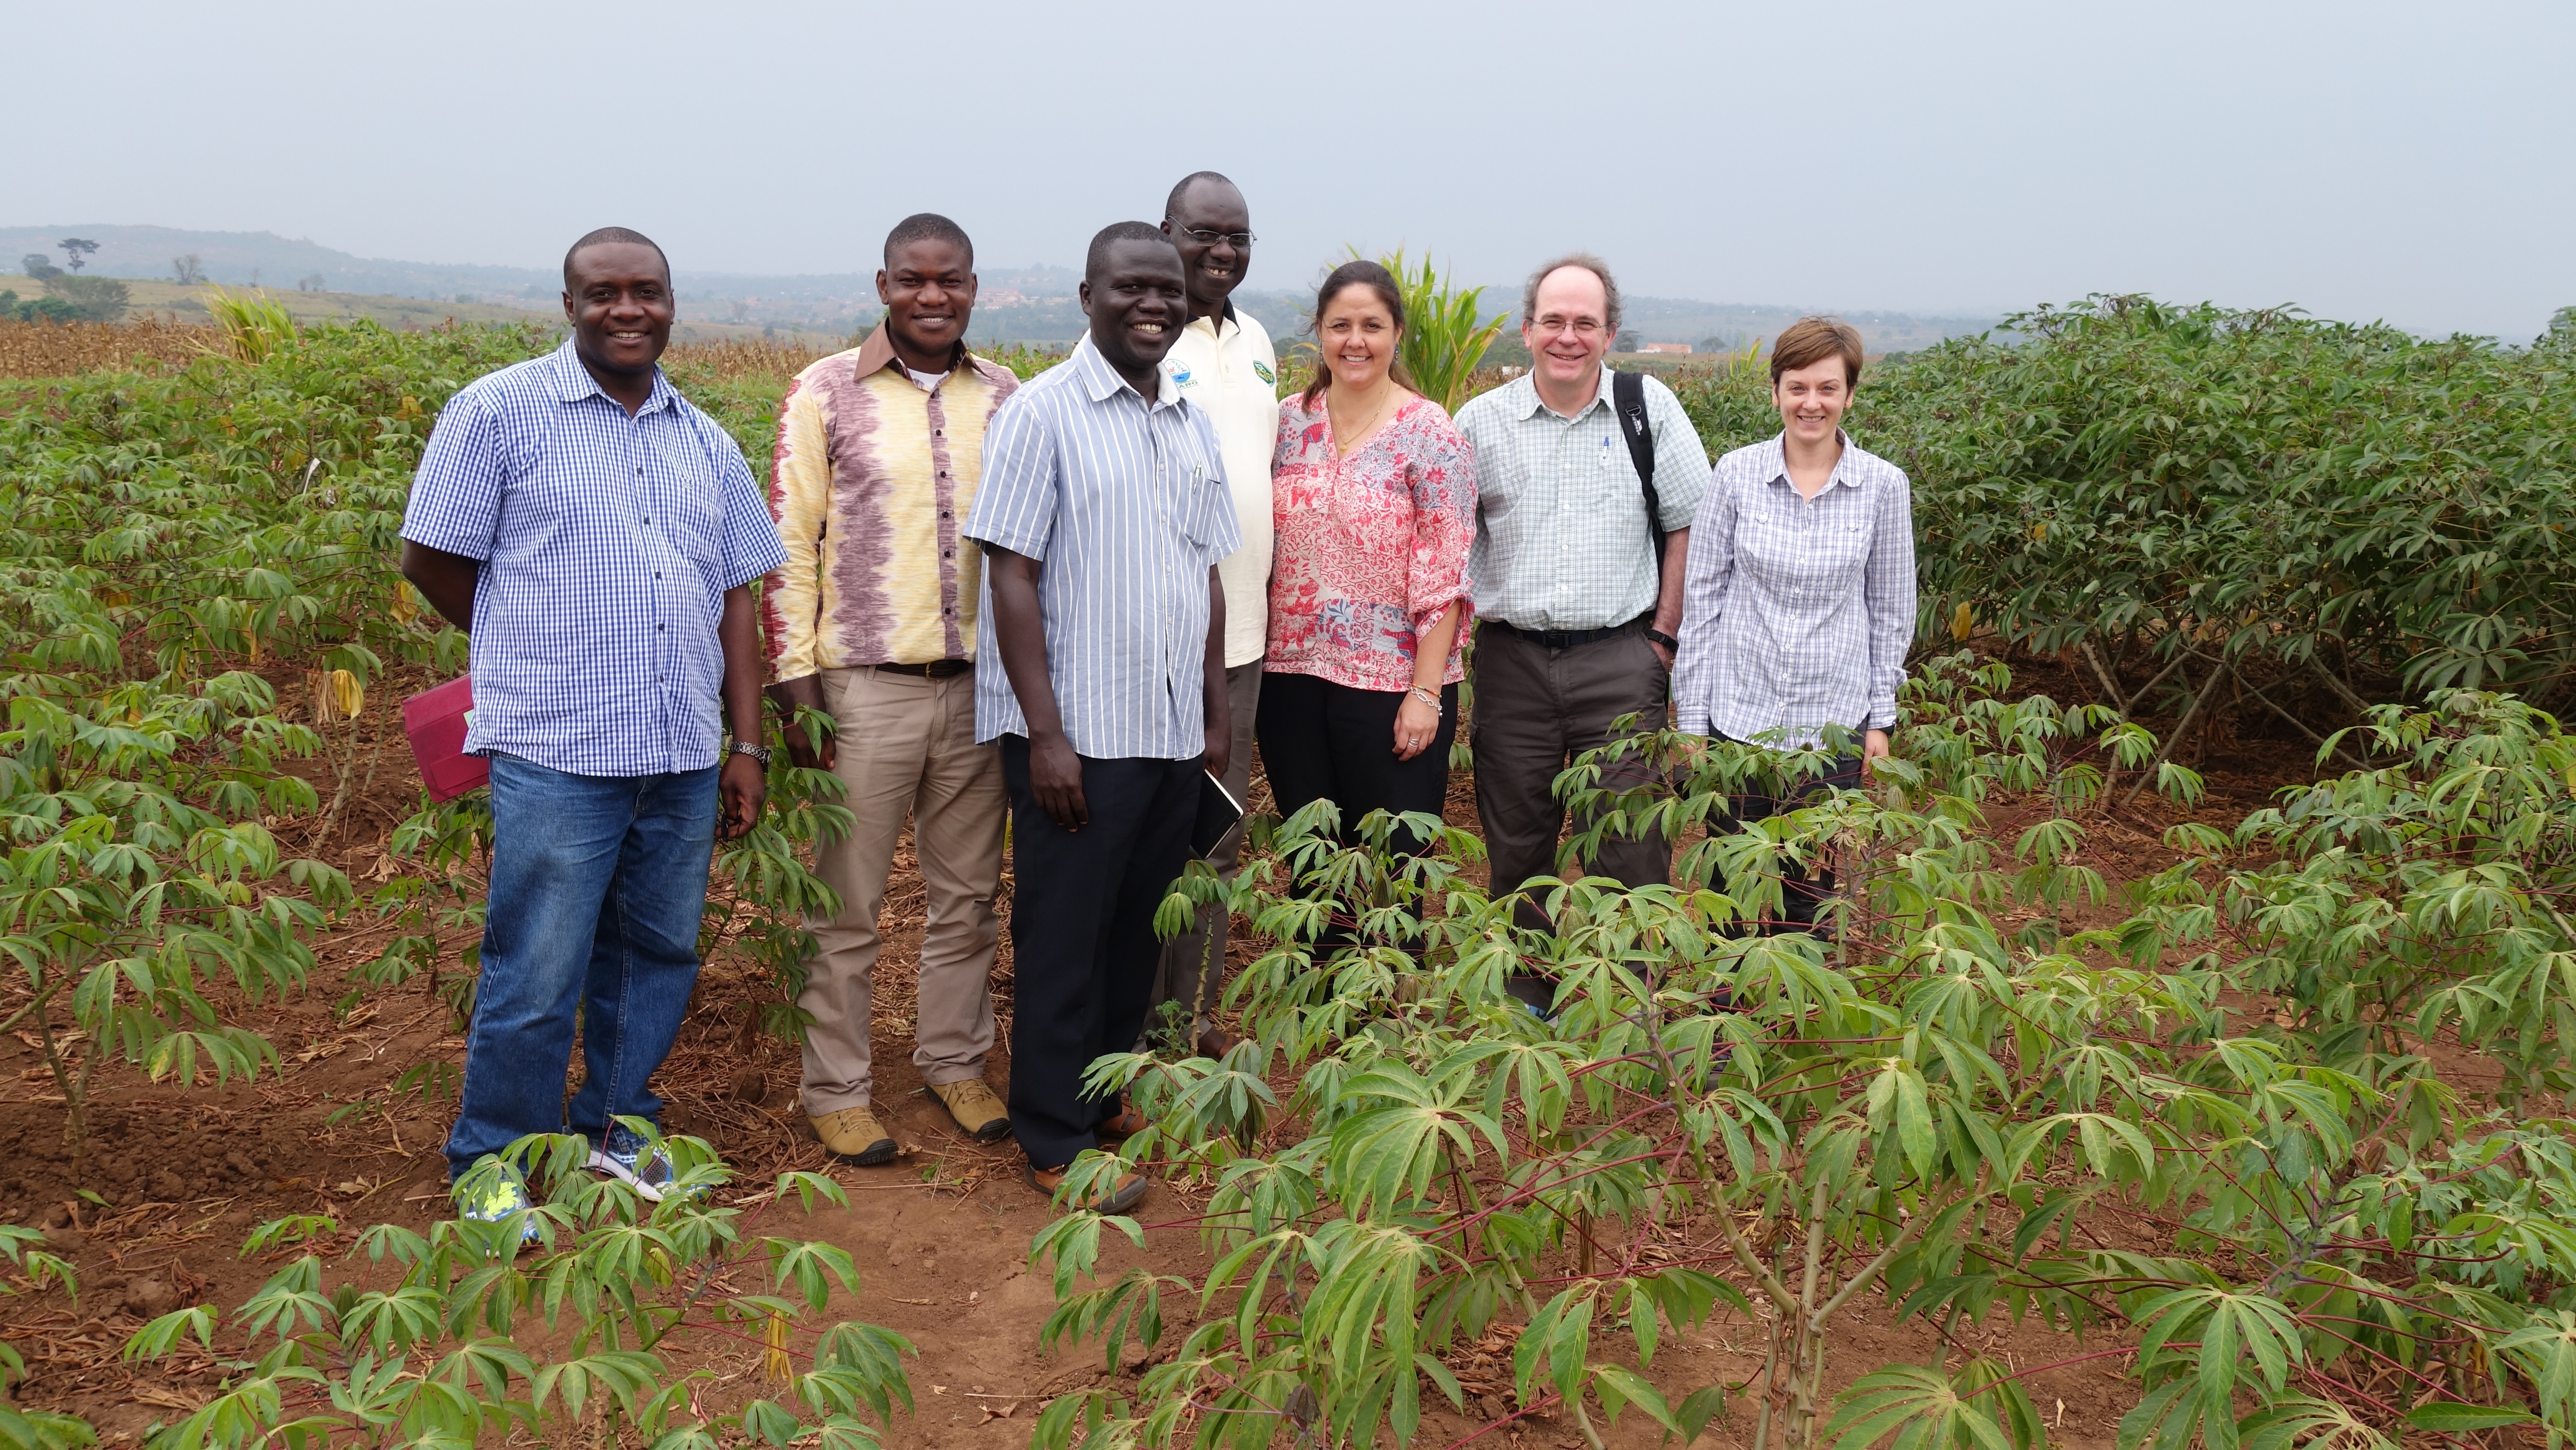 The collaborators on our project work around the world. Here we are visiting the cassava fields at the National Crops Resources Research Institute, Namulonge, Uganda. From left to right: Dr Peter Sseruwagi, Dr Donald Kachigamba, Dr Titus Alicai, Dr Chris Omongo, Dr Laura Boykin, Professor John Colvin, Dr Sarina MacFayden. Photo courtesy of Laura Boykin